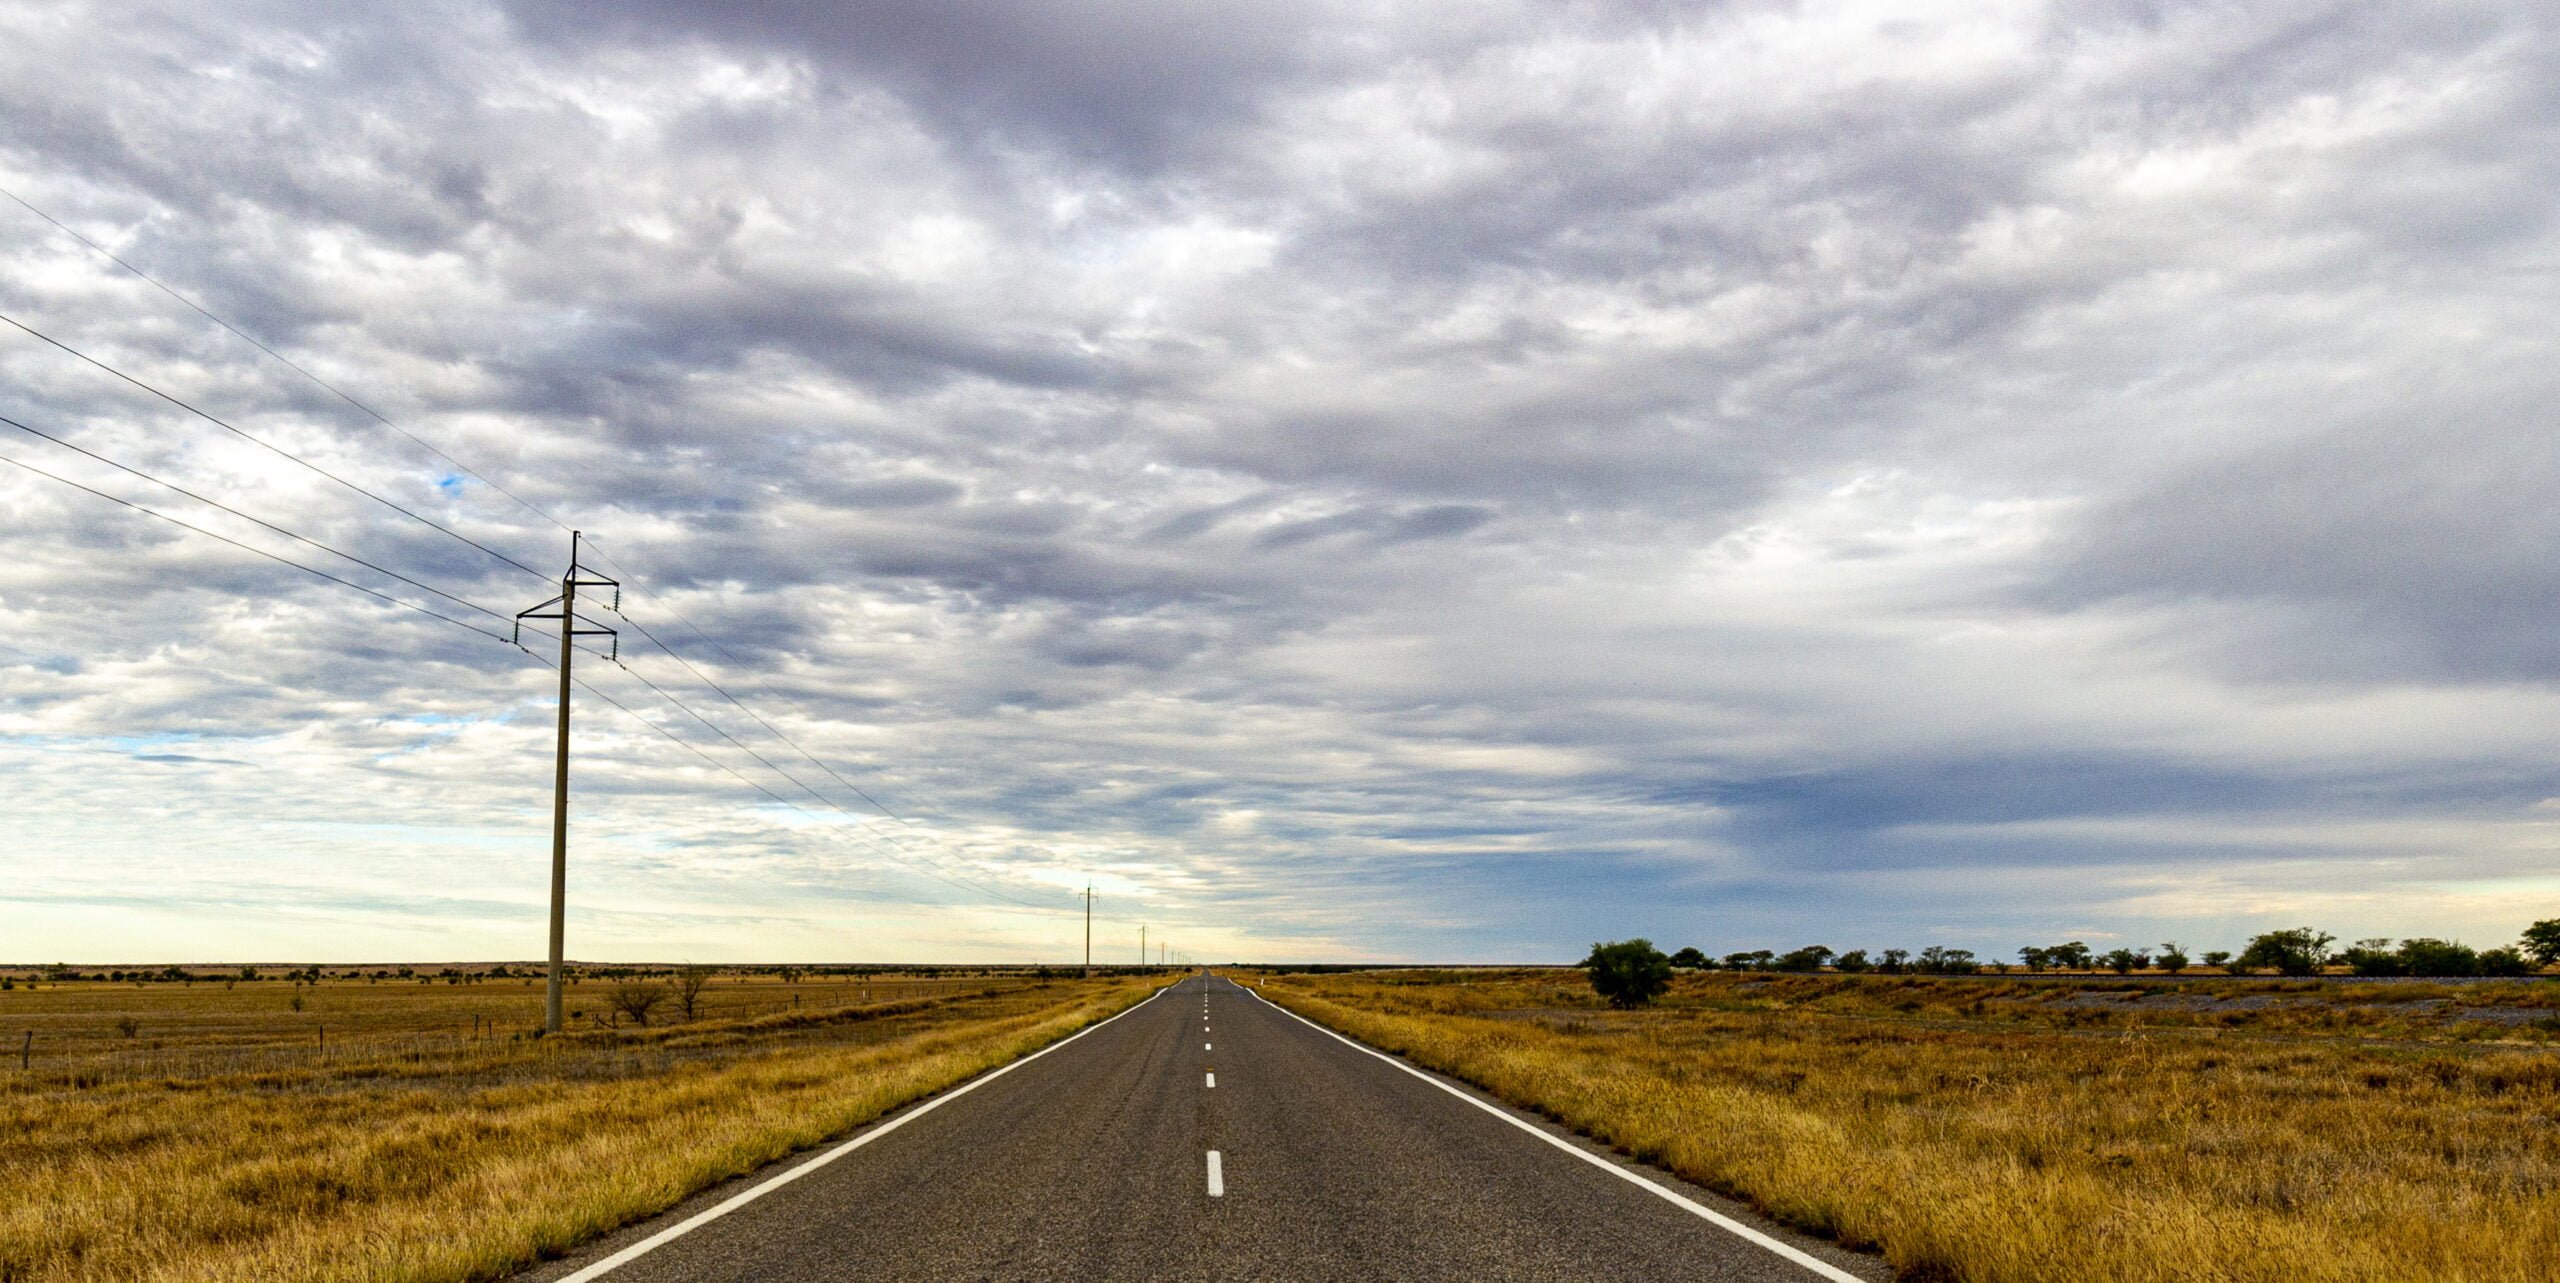 Open road in Queensland outback, arid, dry grass on either side